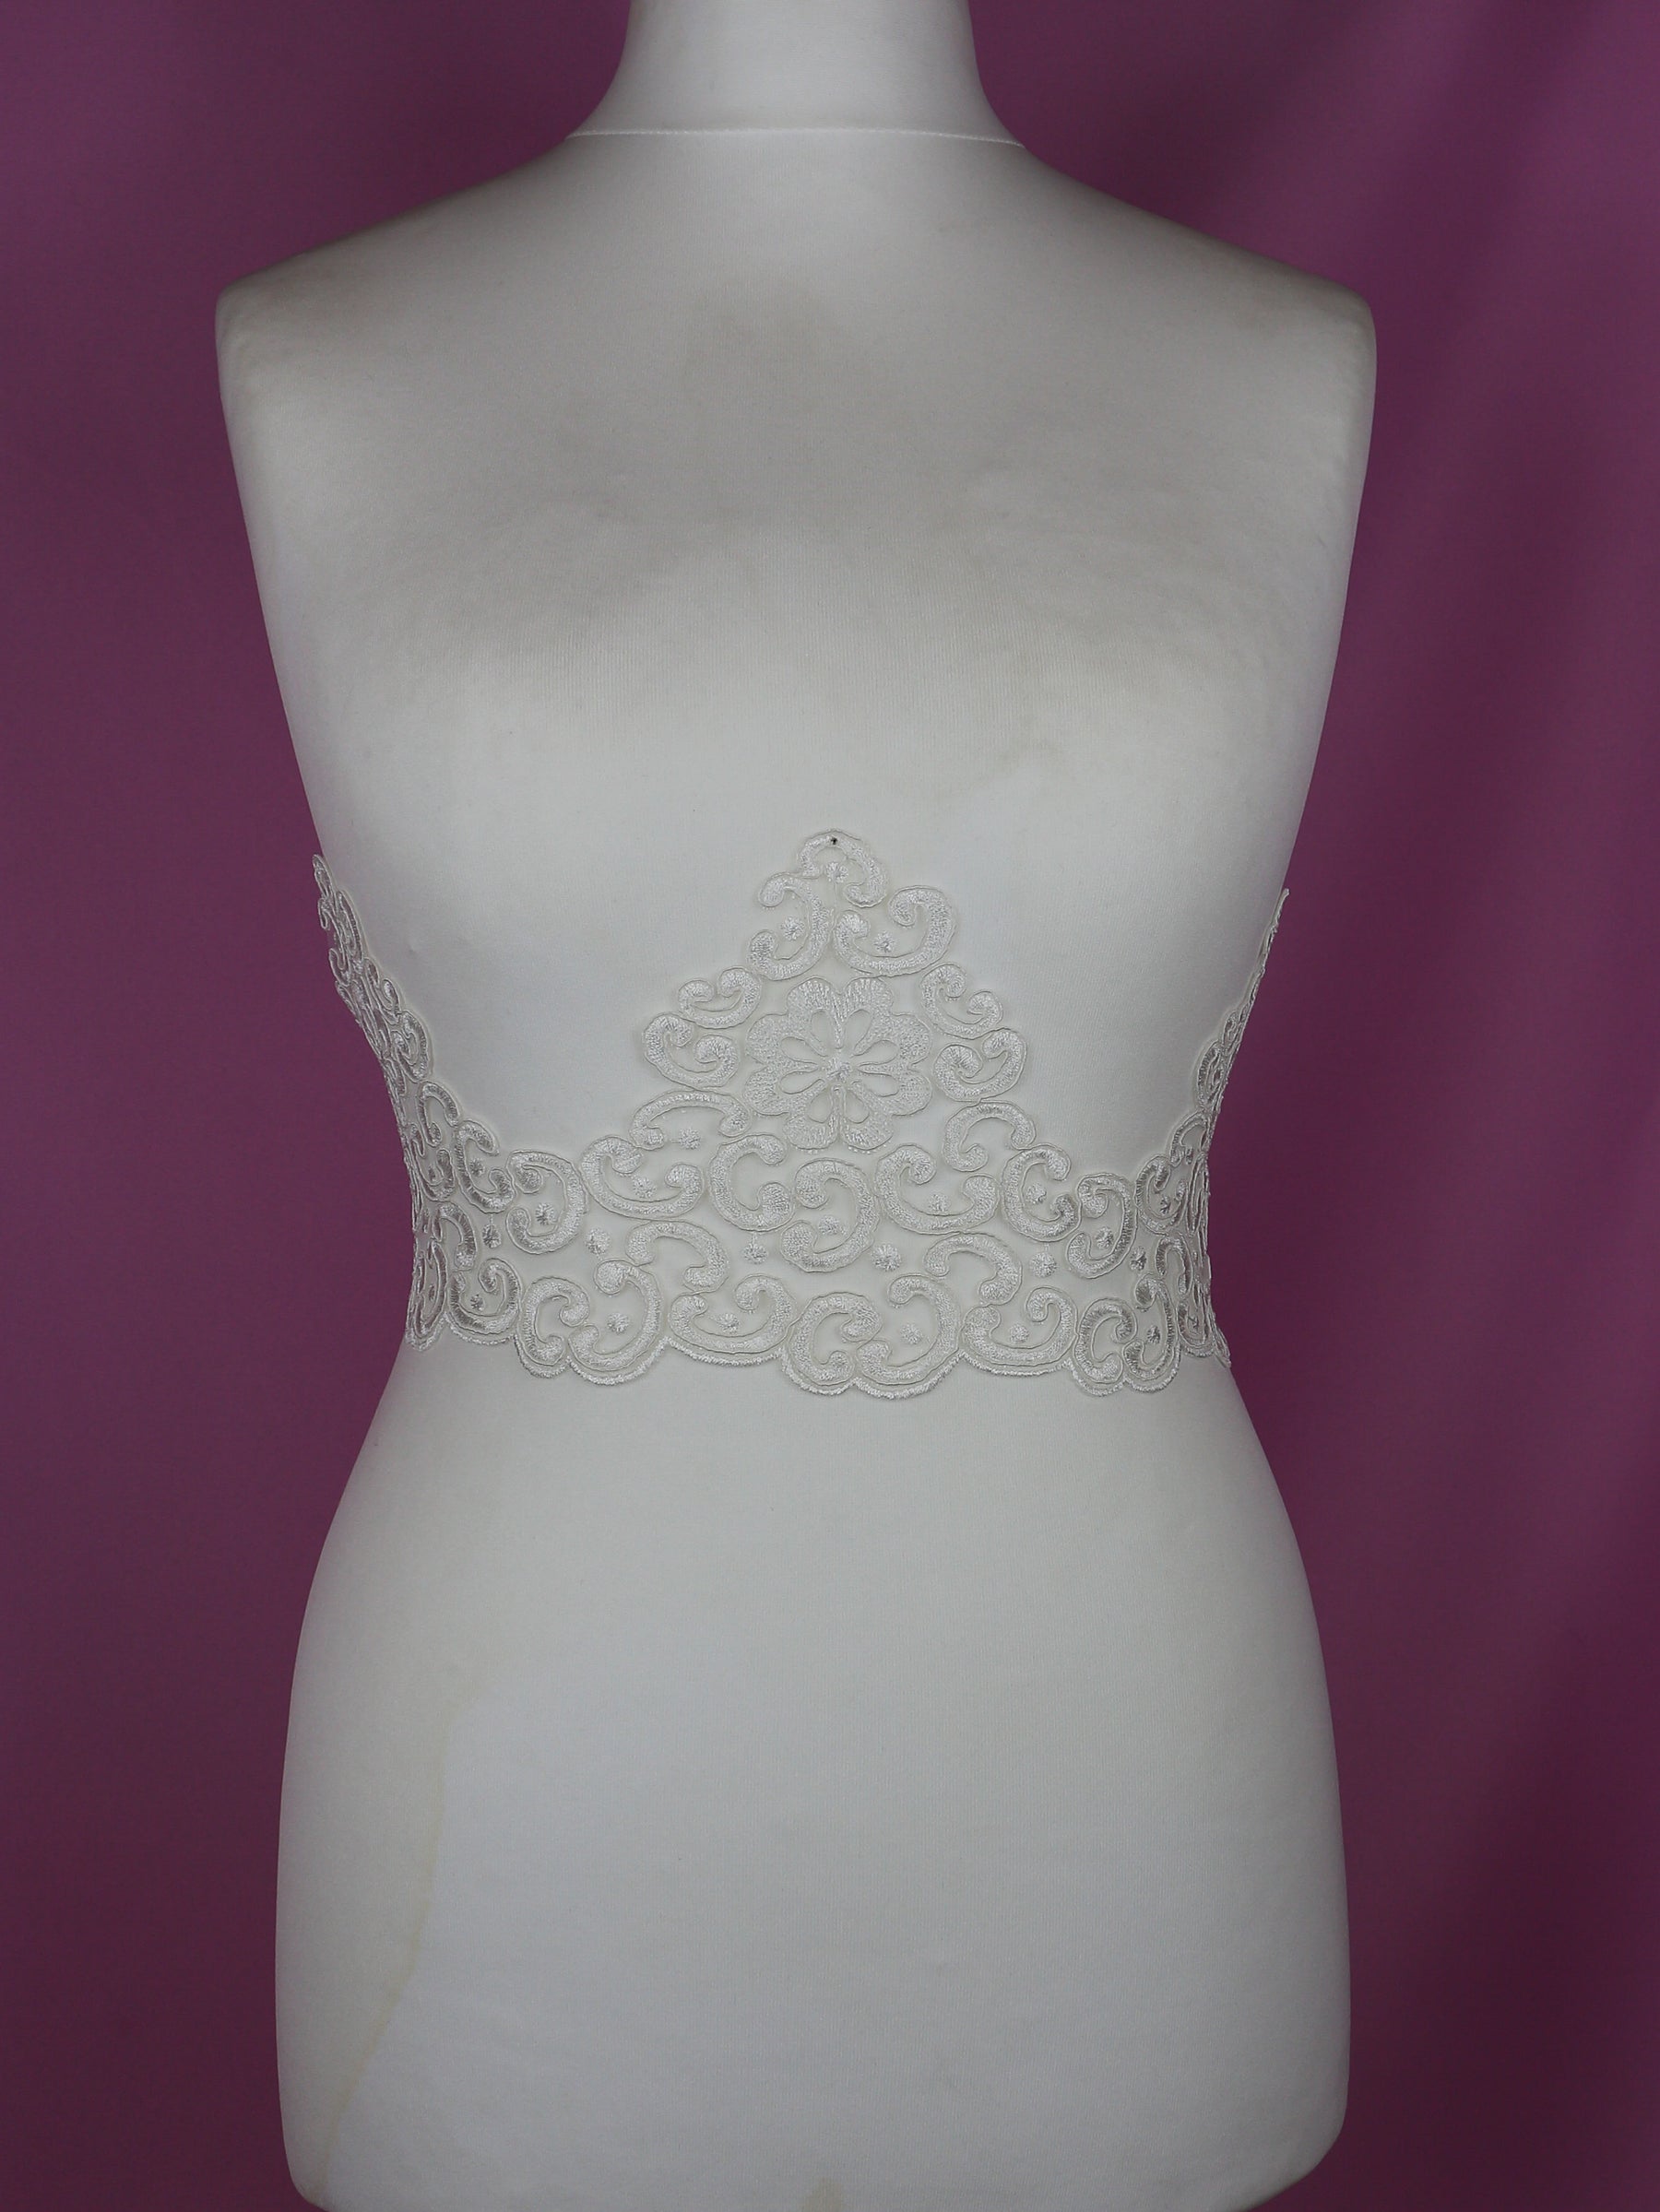 Ivory Corded Lace Trim - Acacia